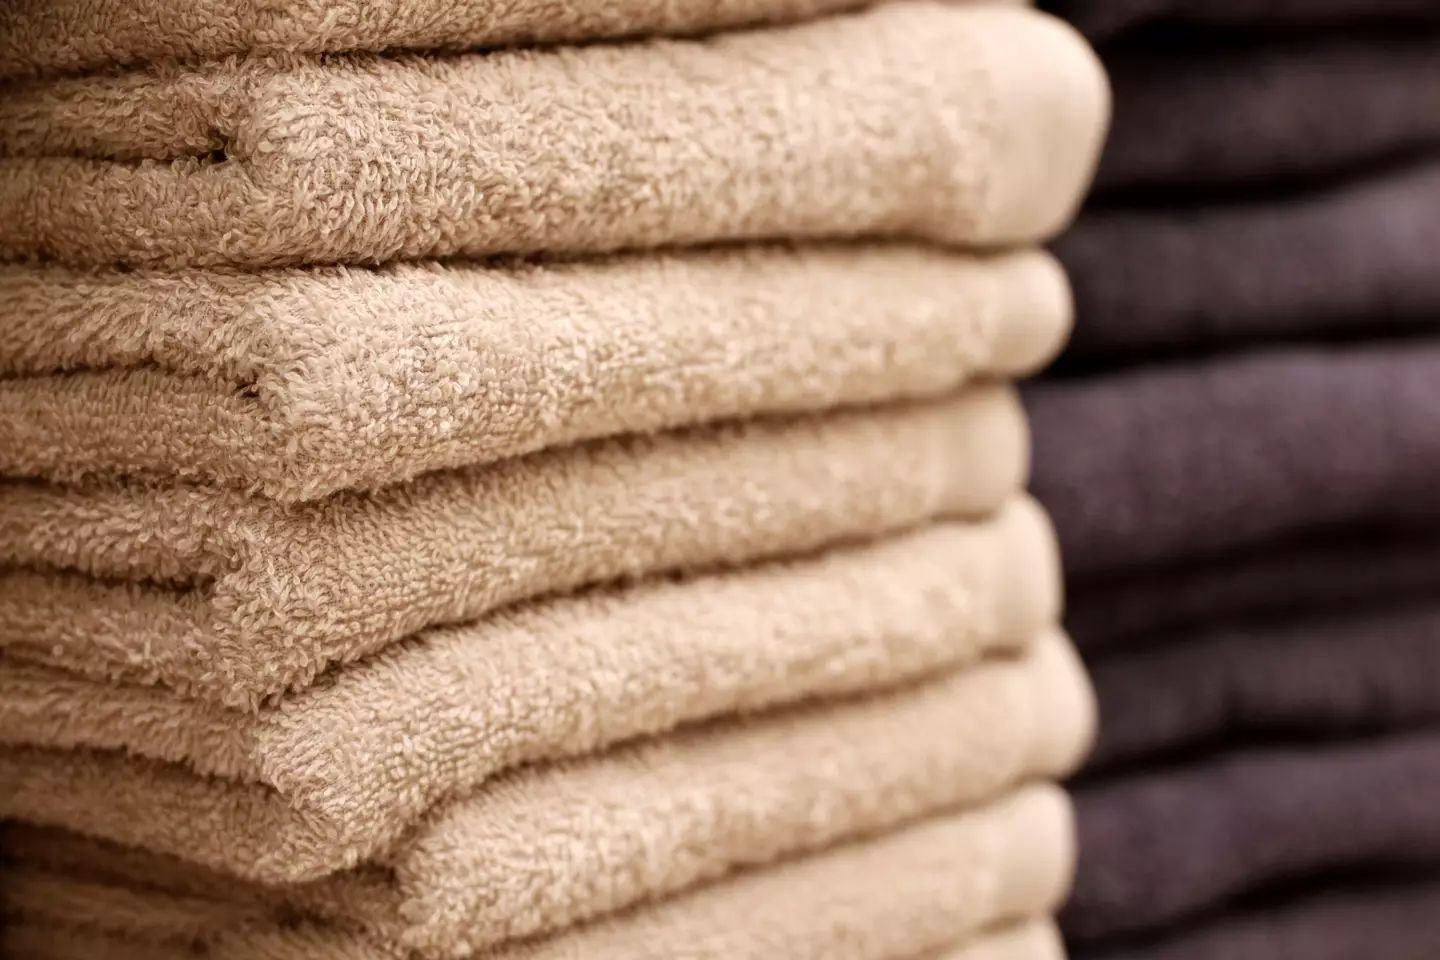 How often do you wash your towels?